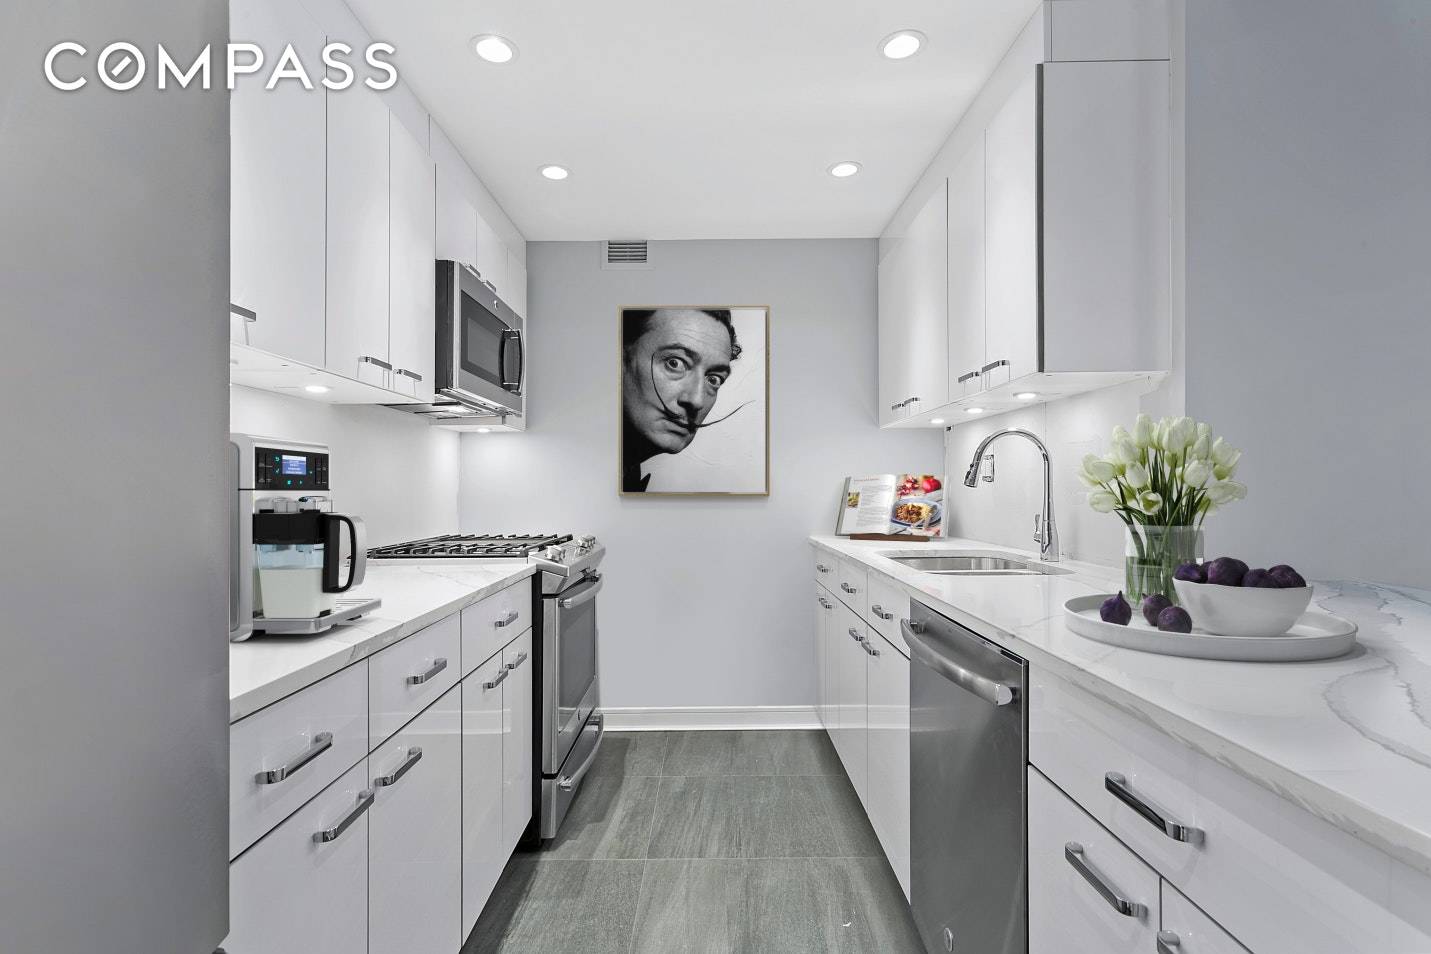 BE THE FIRST to live in this newly renovated two bedroom, two bath condo at the landmark Sophia Condominium located in the heart of Lincoln Center.